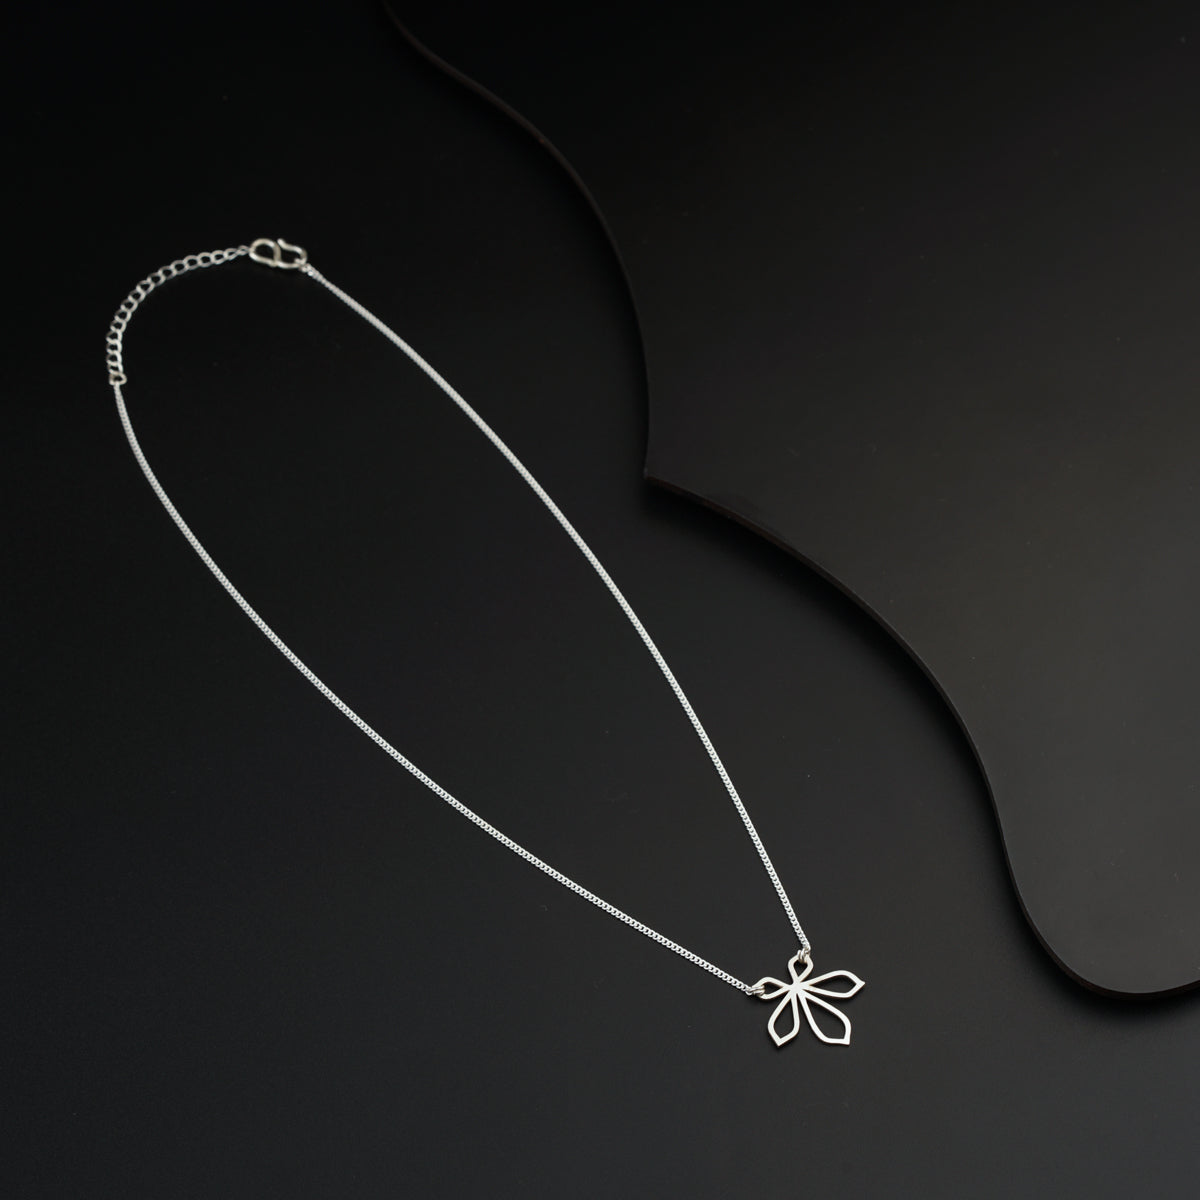 a necklace with a bow on a black background